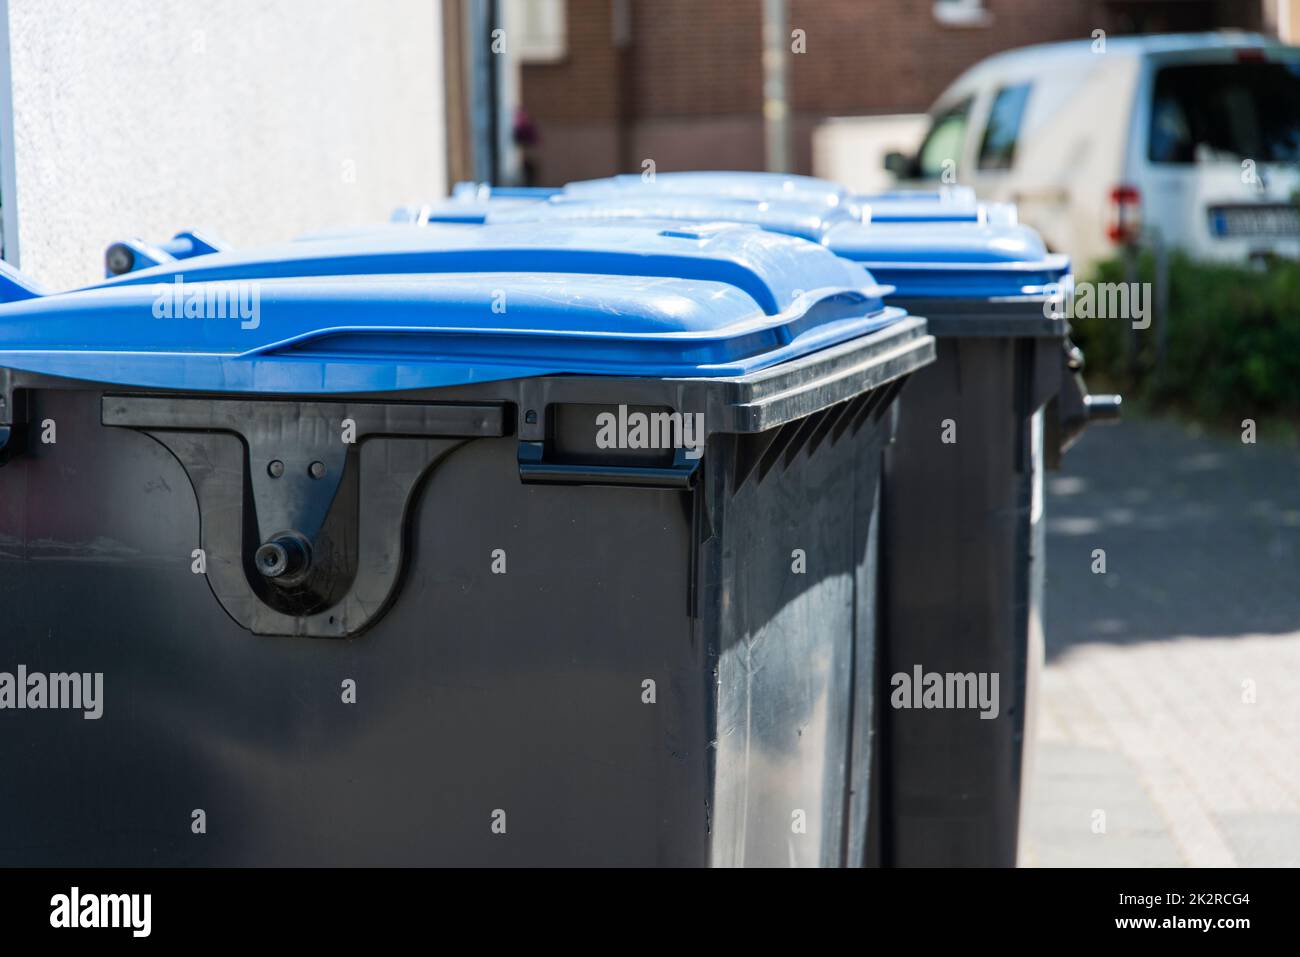 Garbage cans in closeup Stock Photo